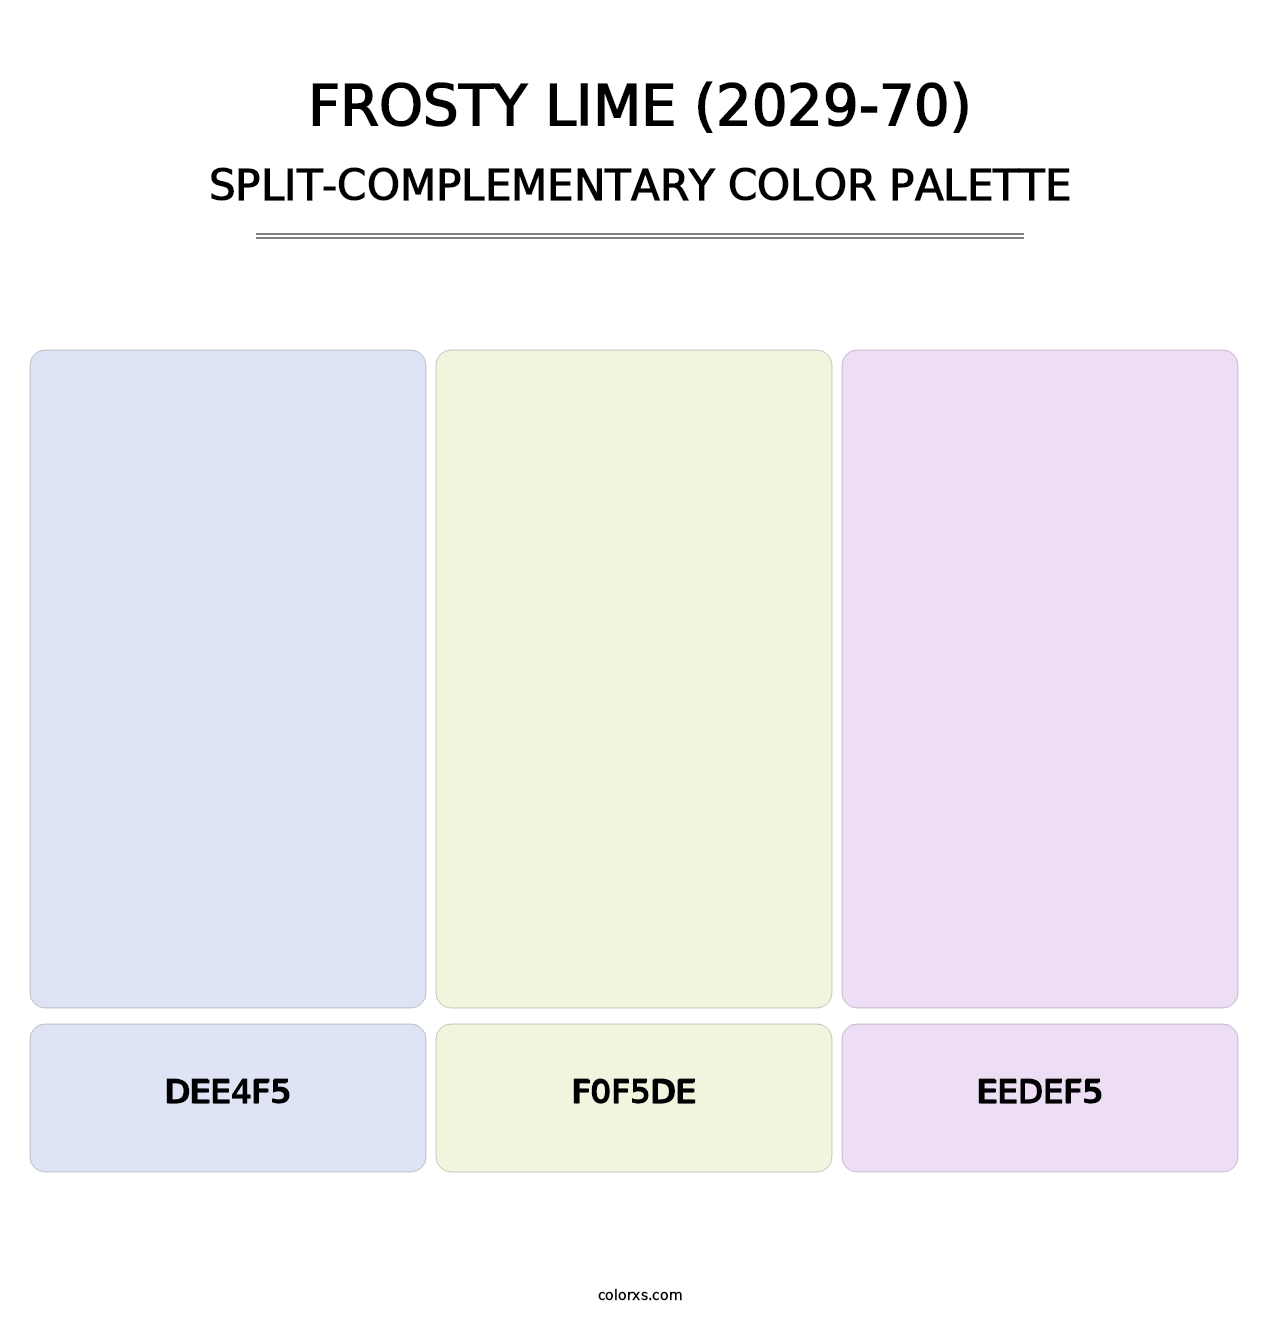 Frosty Lime (2029-70) - Split-Complementary Color Palette